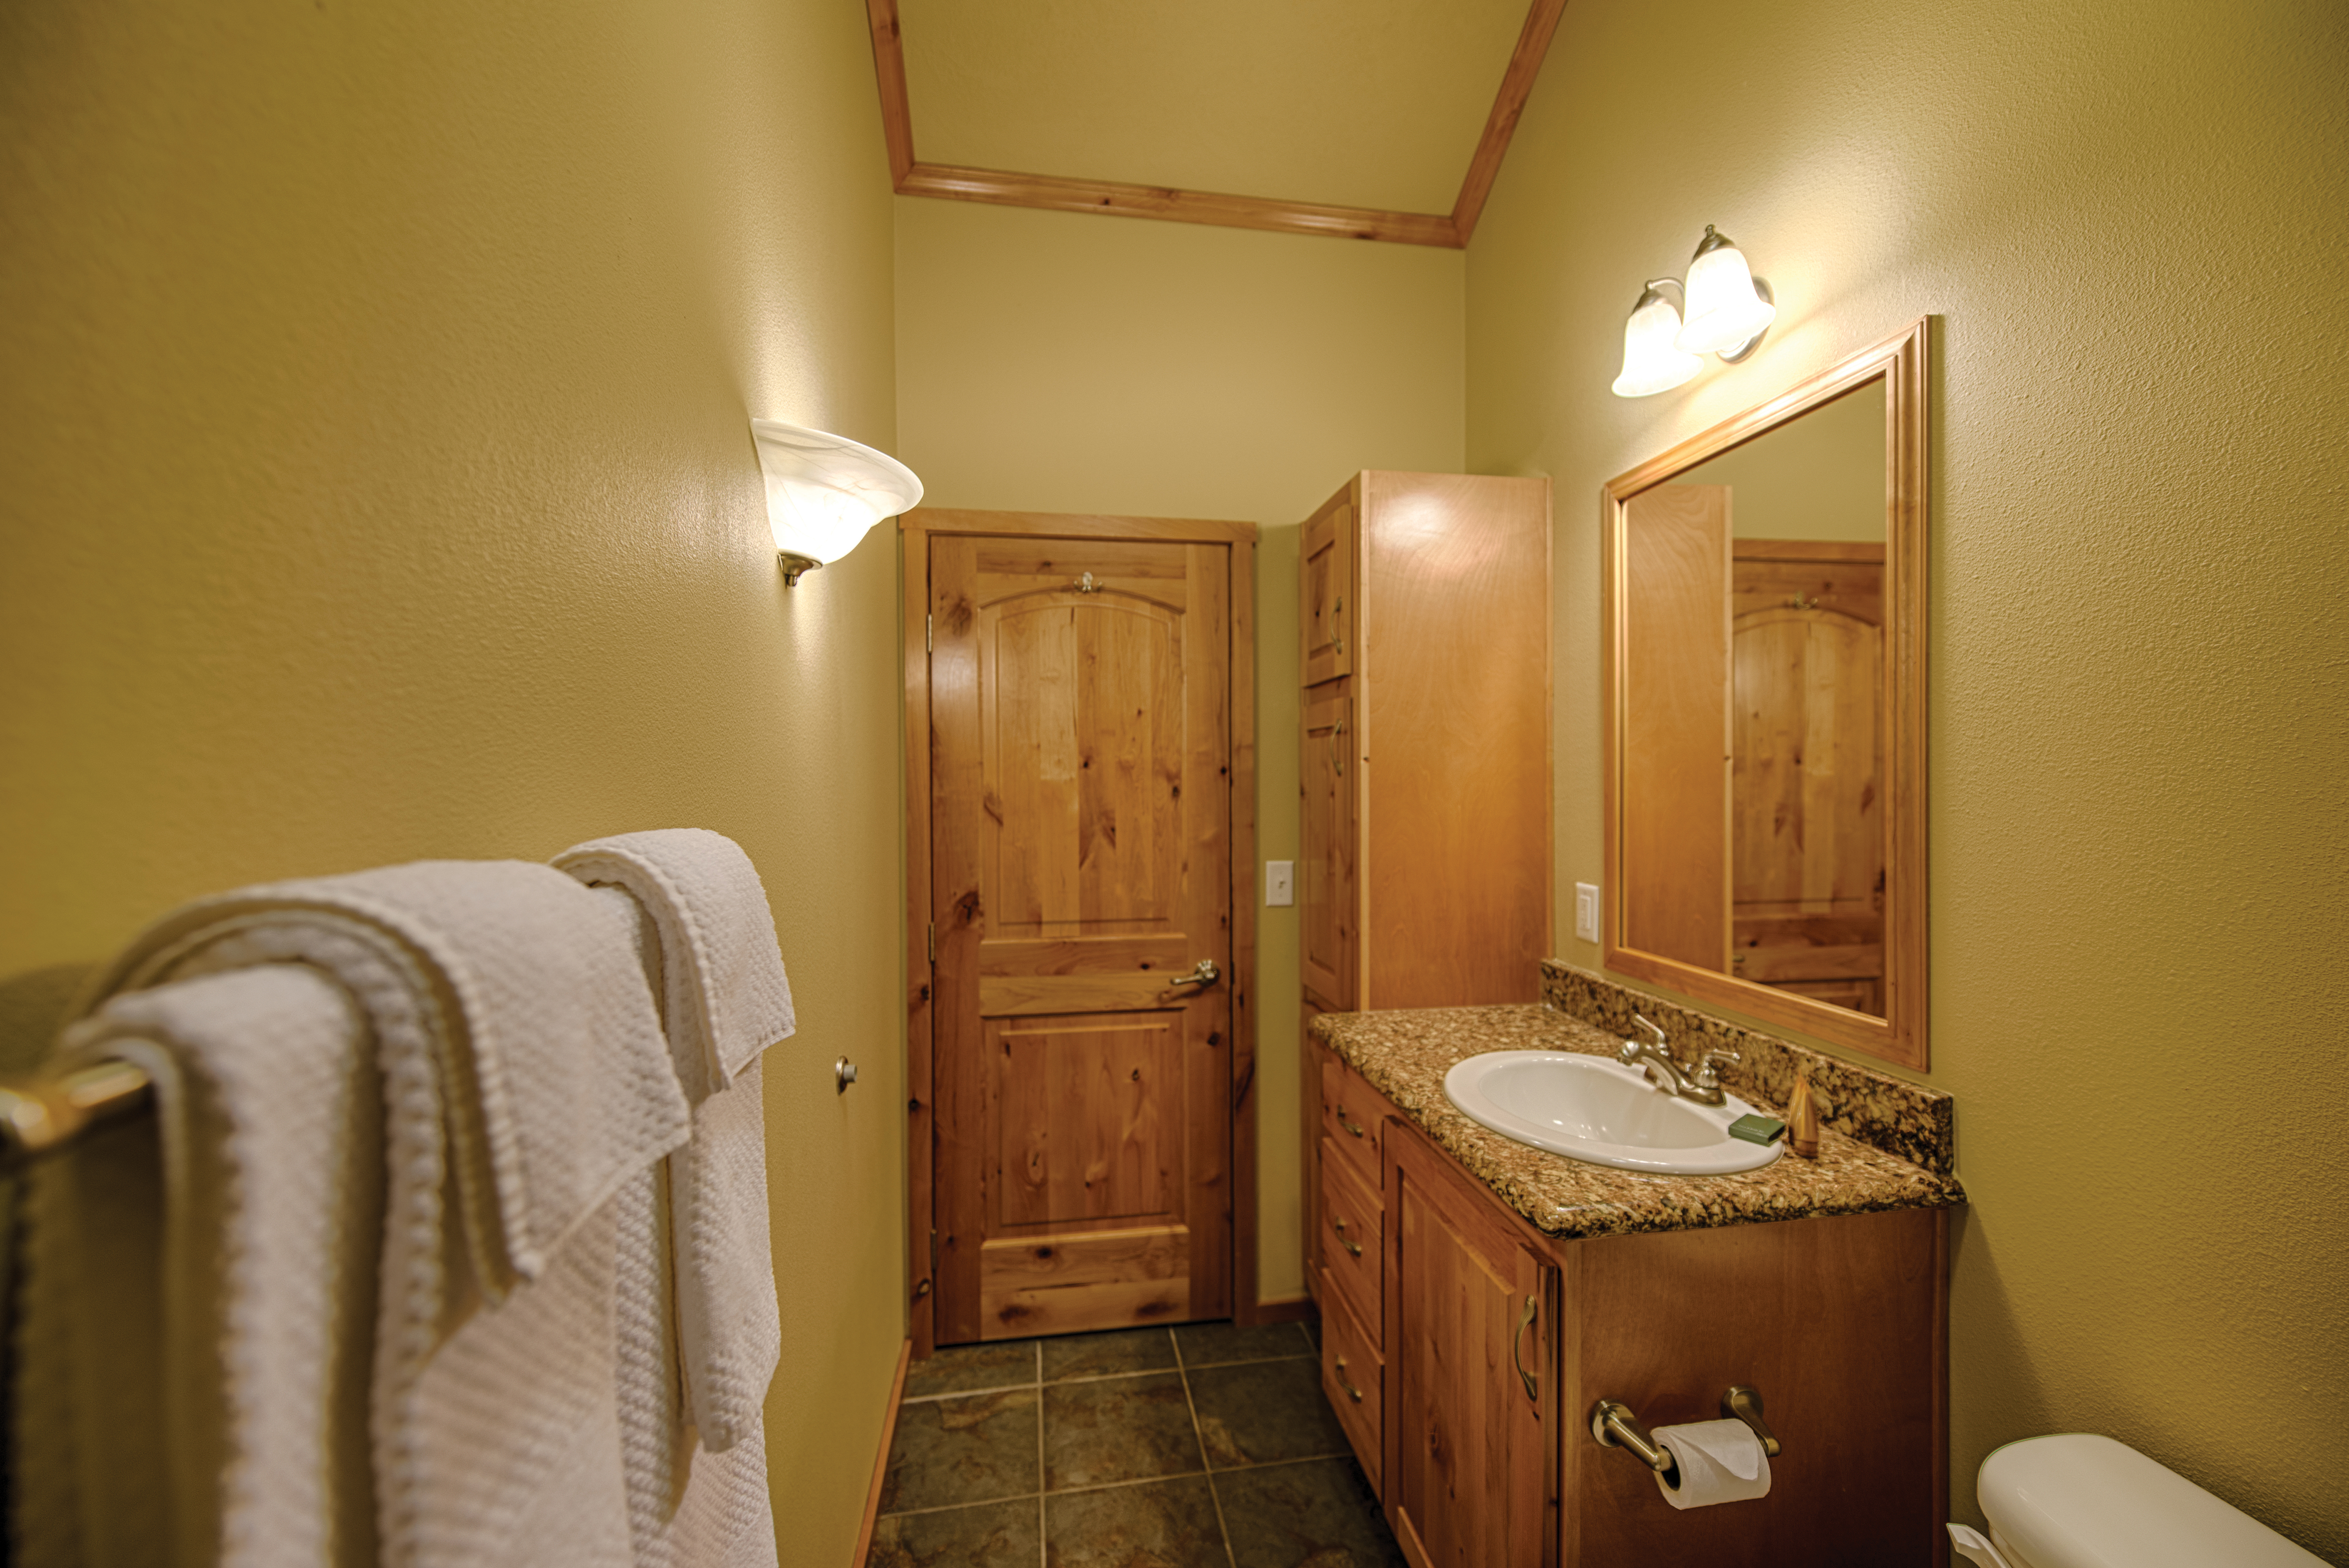 Bathroom interior view at the Explorer Cabins at Yellowstone in West Yellowstone, MT